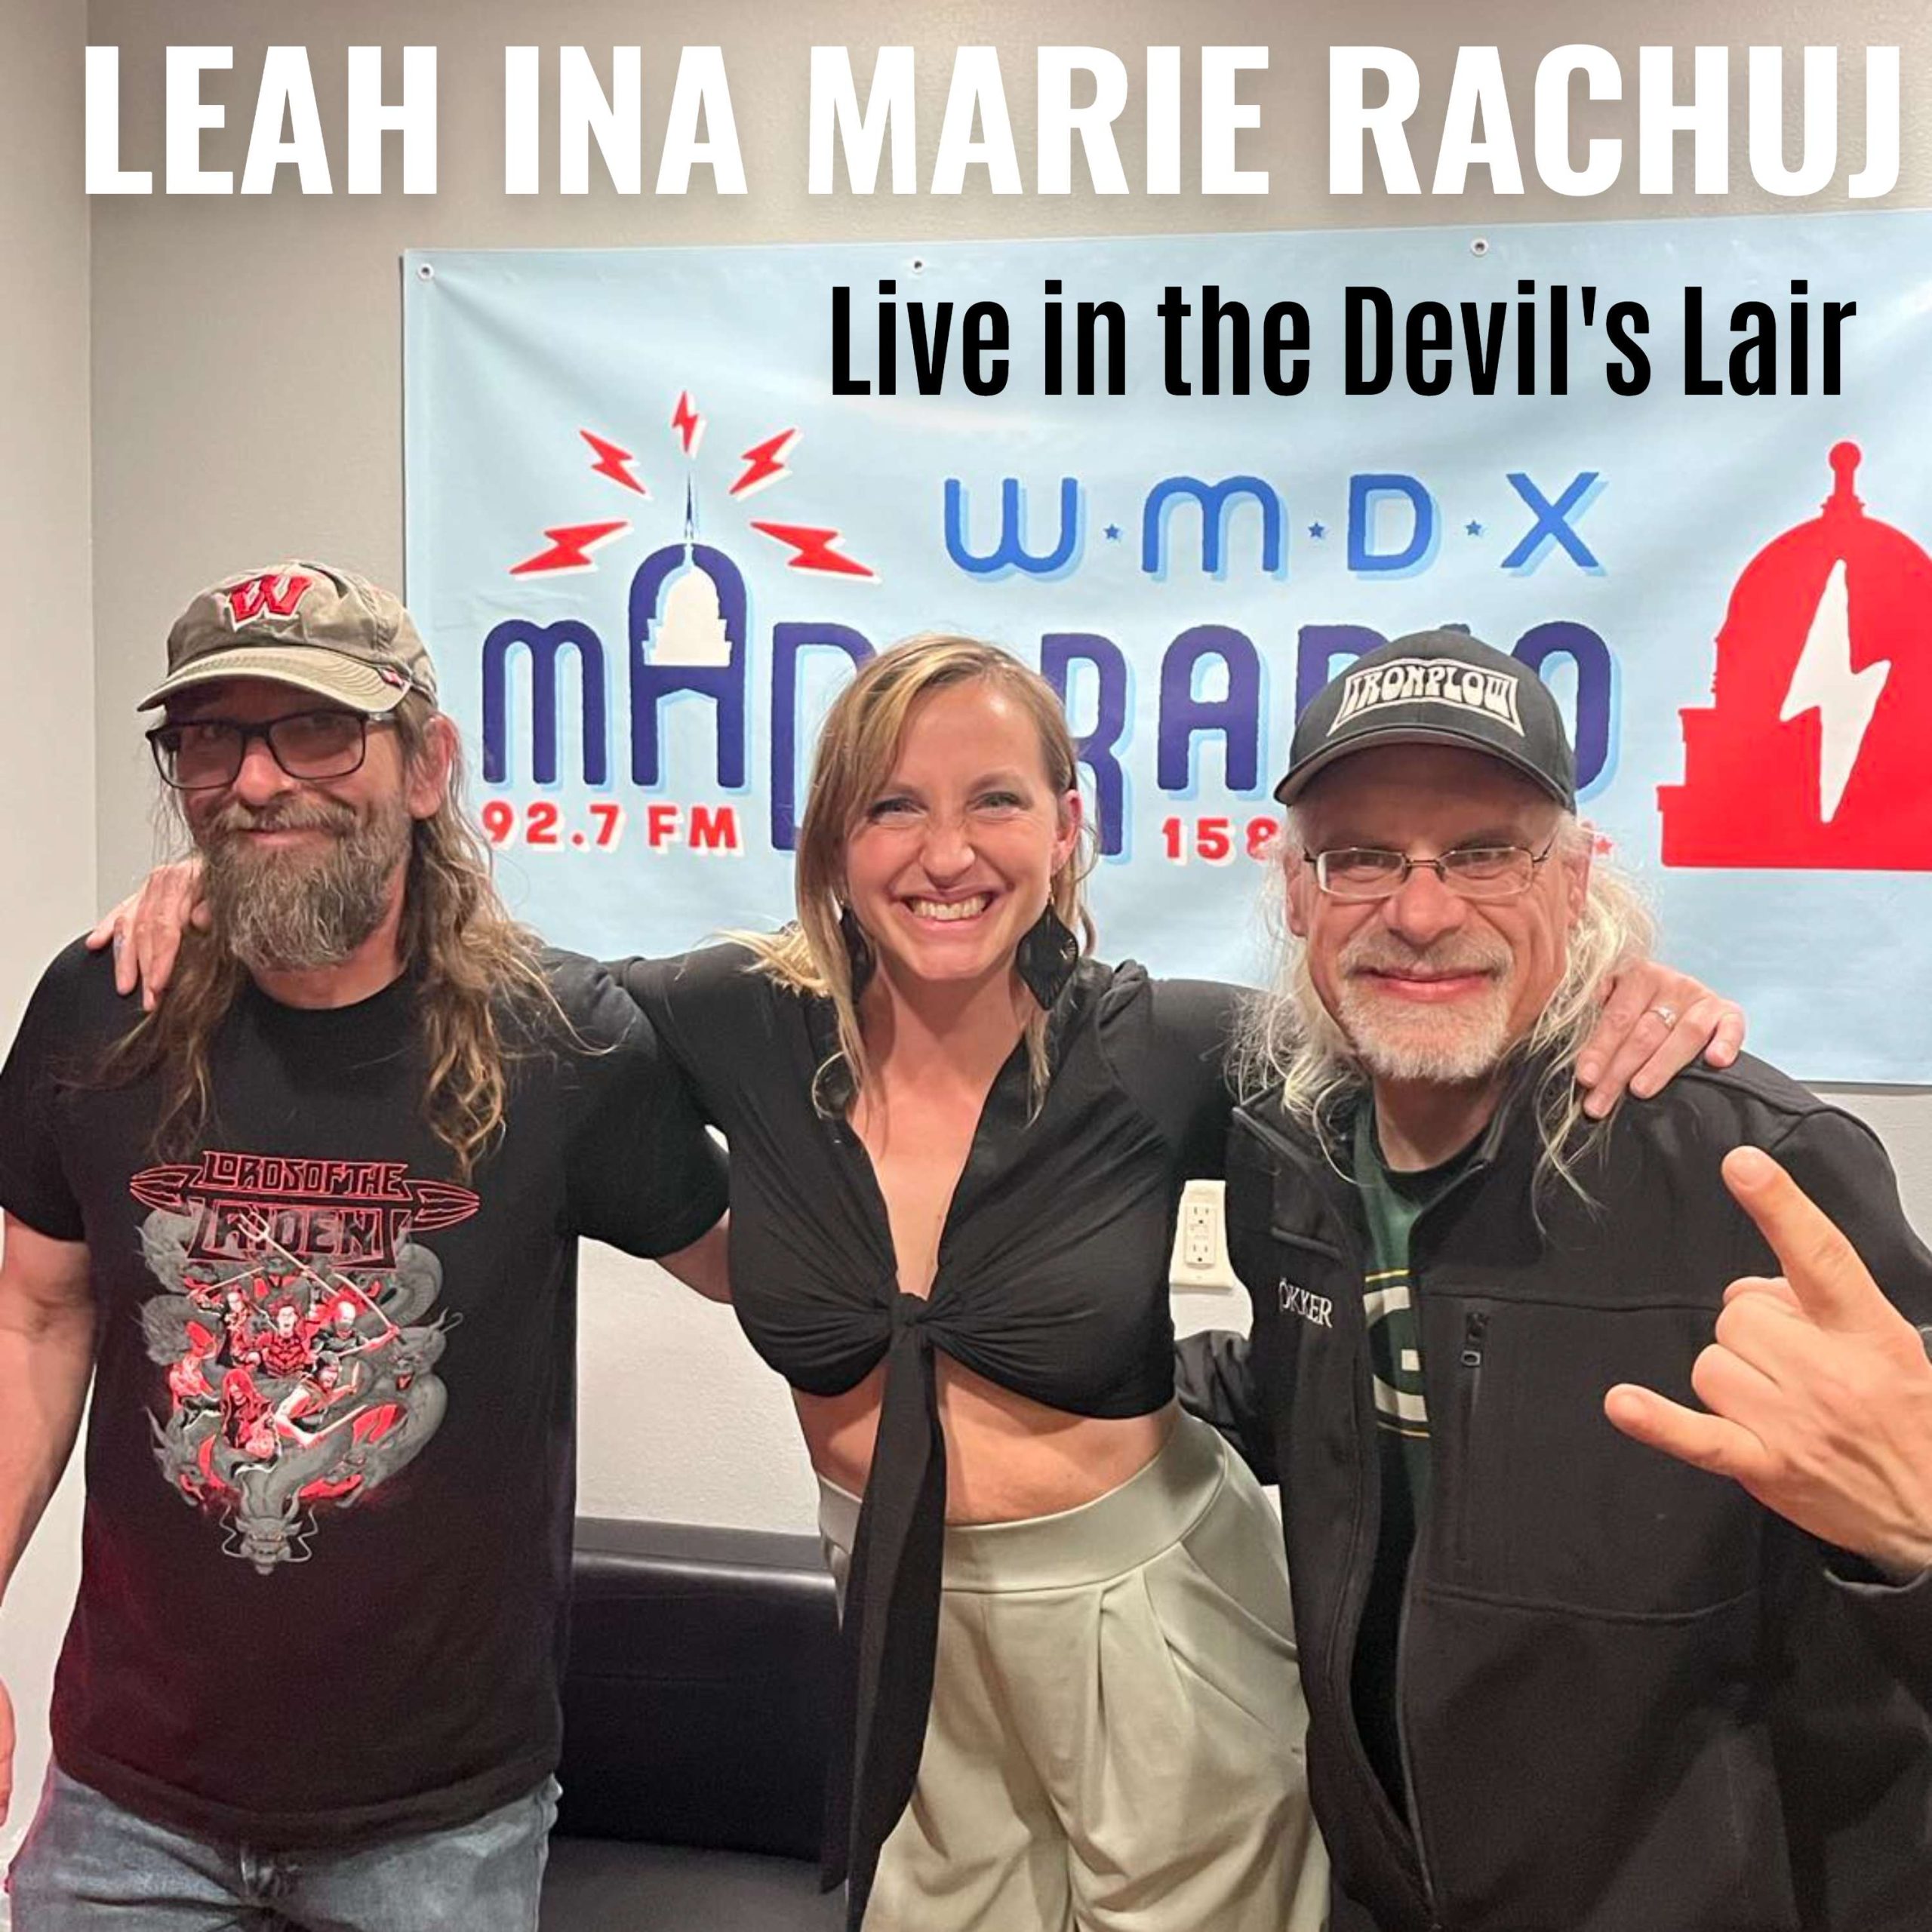 Jimmy K, Leah Ina Marie Rachuj, Rökker are in the Devil's Lair on Max Ink Radio